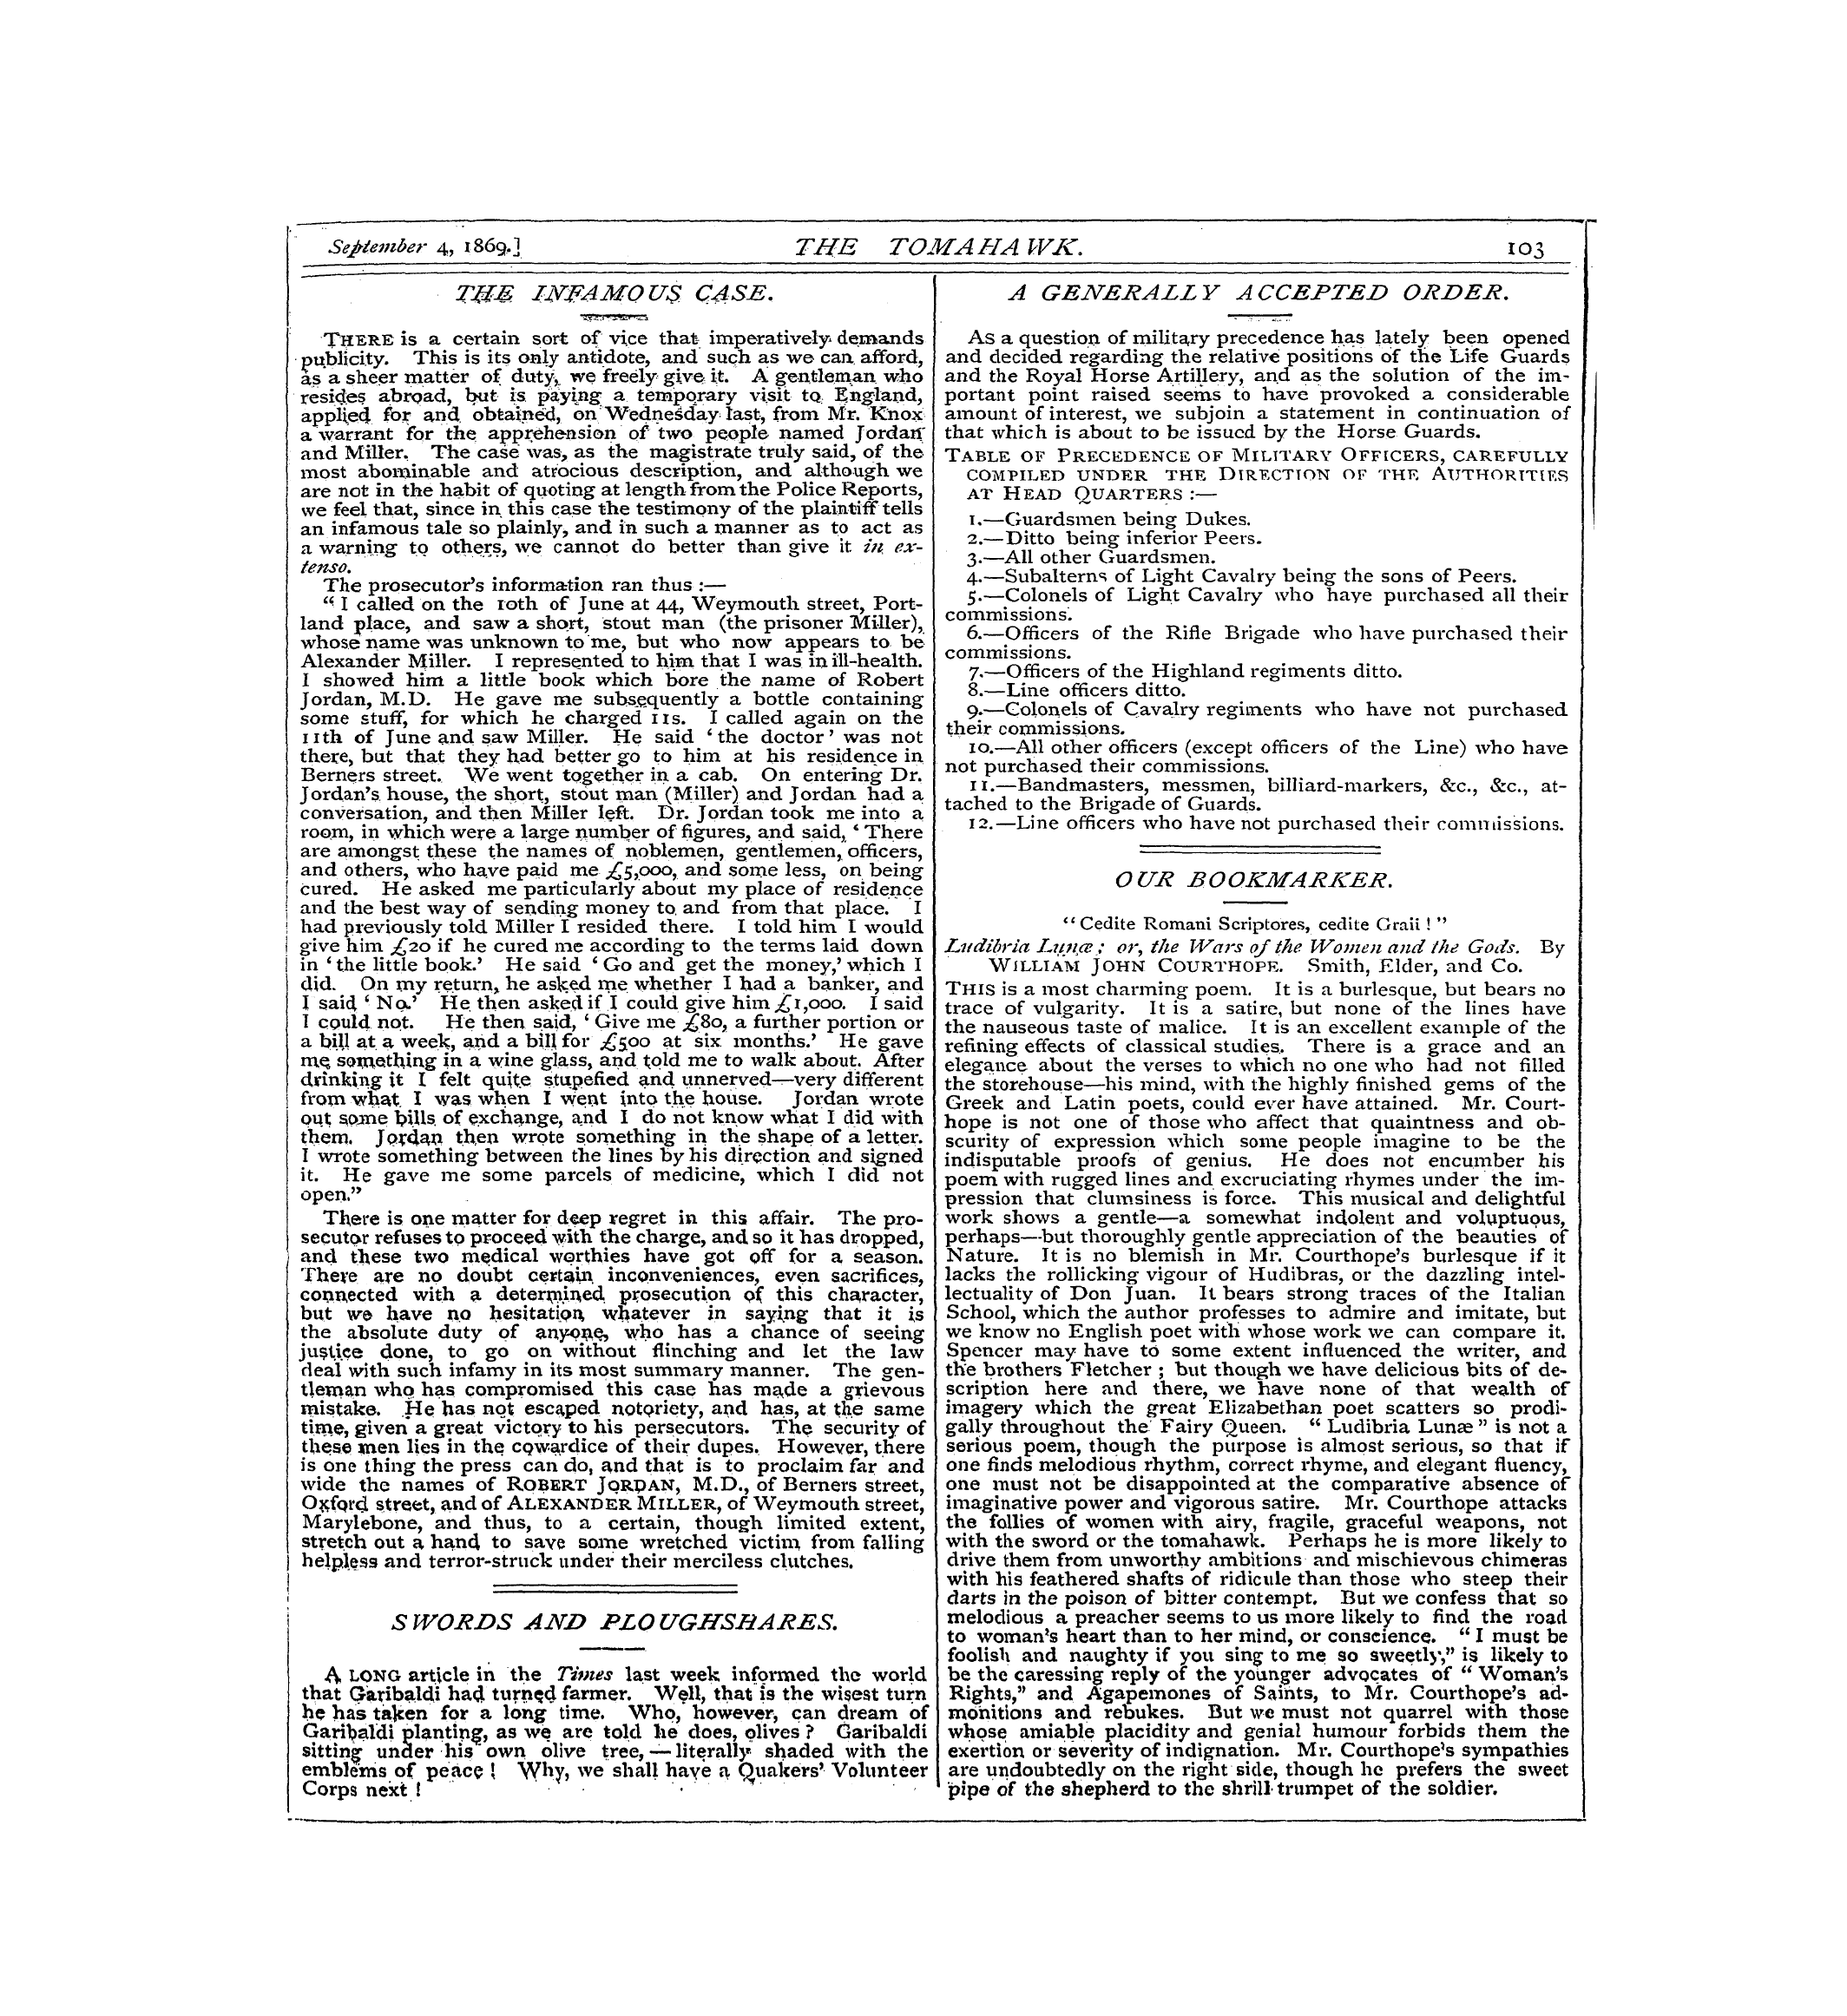 Tomahawk (1867-1870): jS F Y, 1st edition - 1 S Words And Plo Ughshares.